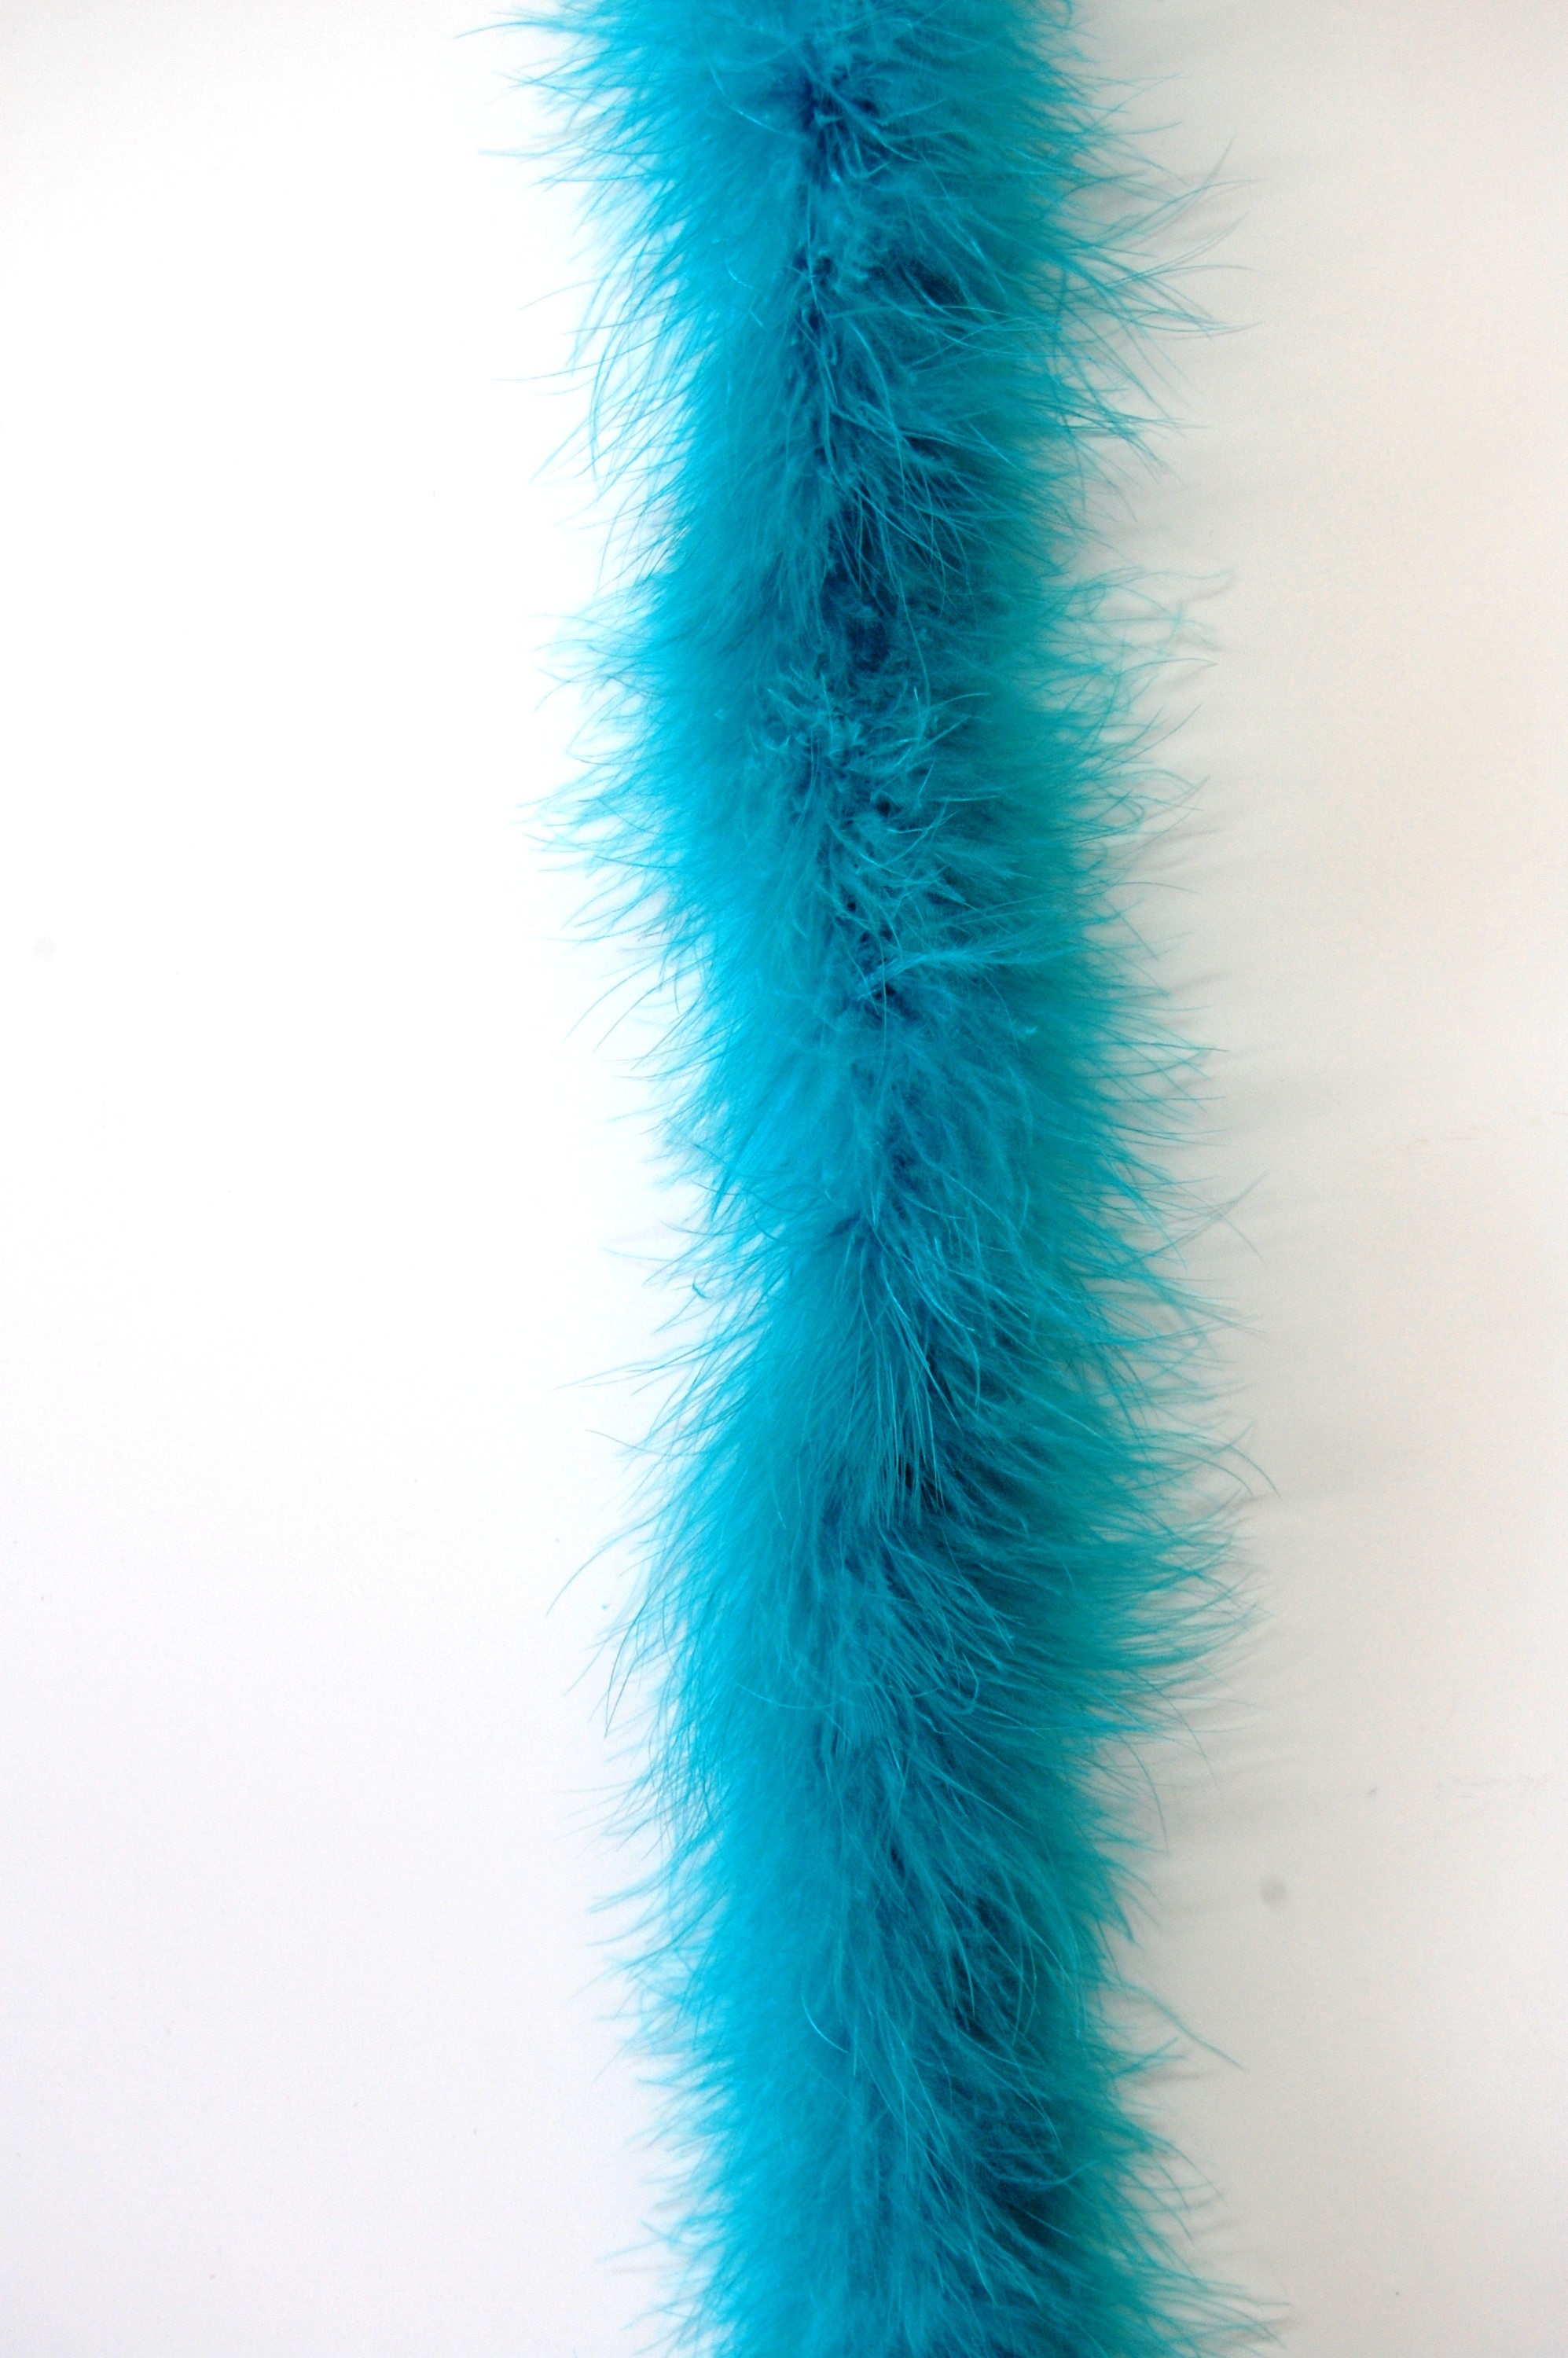 THIN MARABOU Feather BOA Top Quality 15 Gram/72 MANY COLORS  (Halloween/Costume)